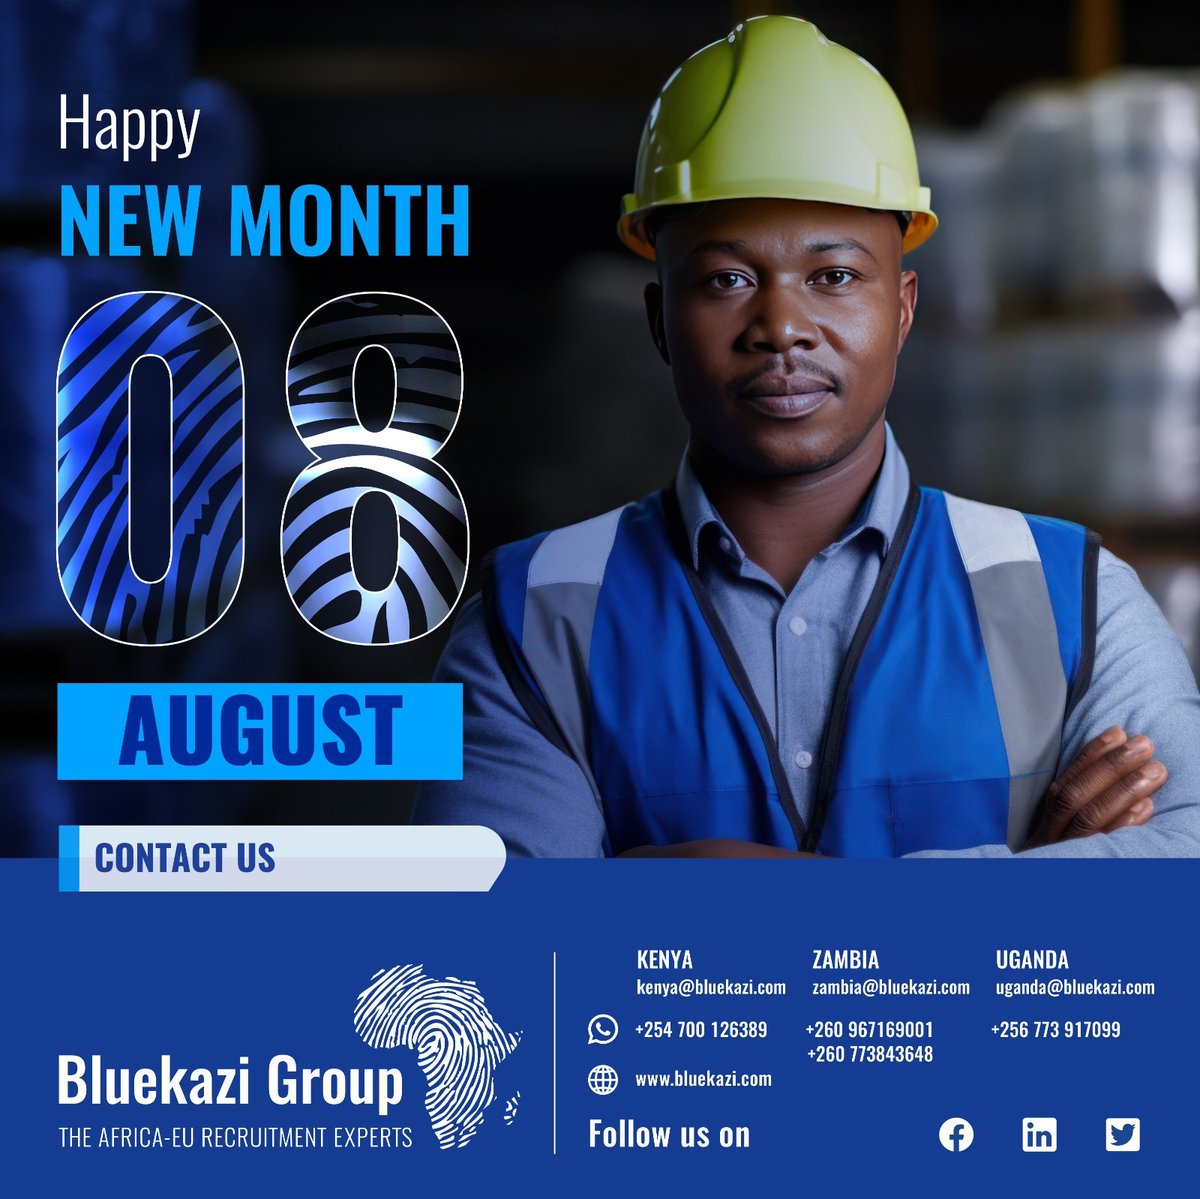 Happy new month from Bluekazi Group. We welcome you and look forward to working with you in the coming month. We wish you a happy and fulfilling new month.

#recruitmentagency #workingingermany #opportunitiesingermany #internationaljobs